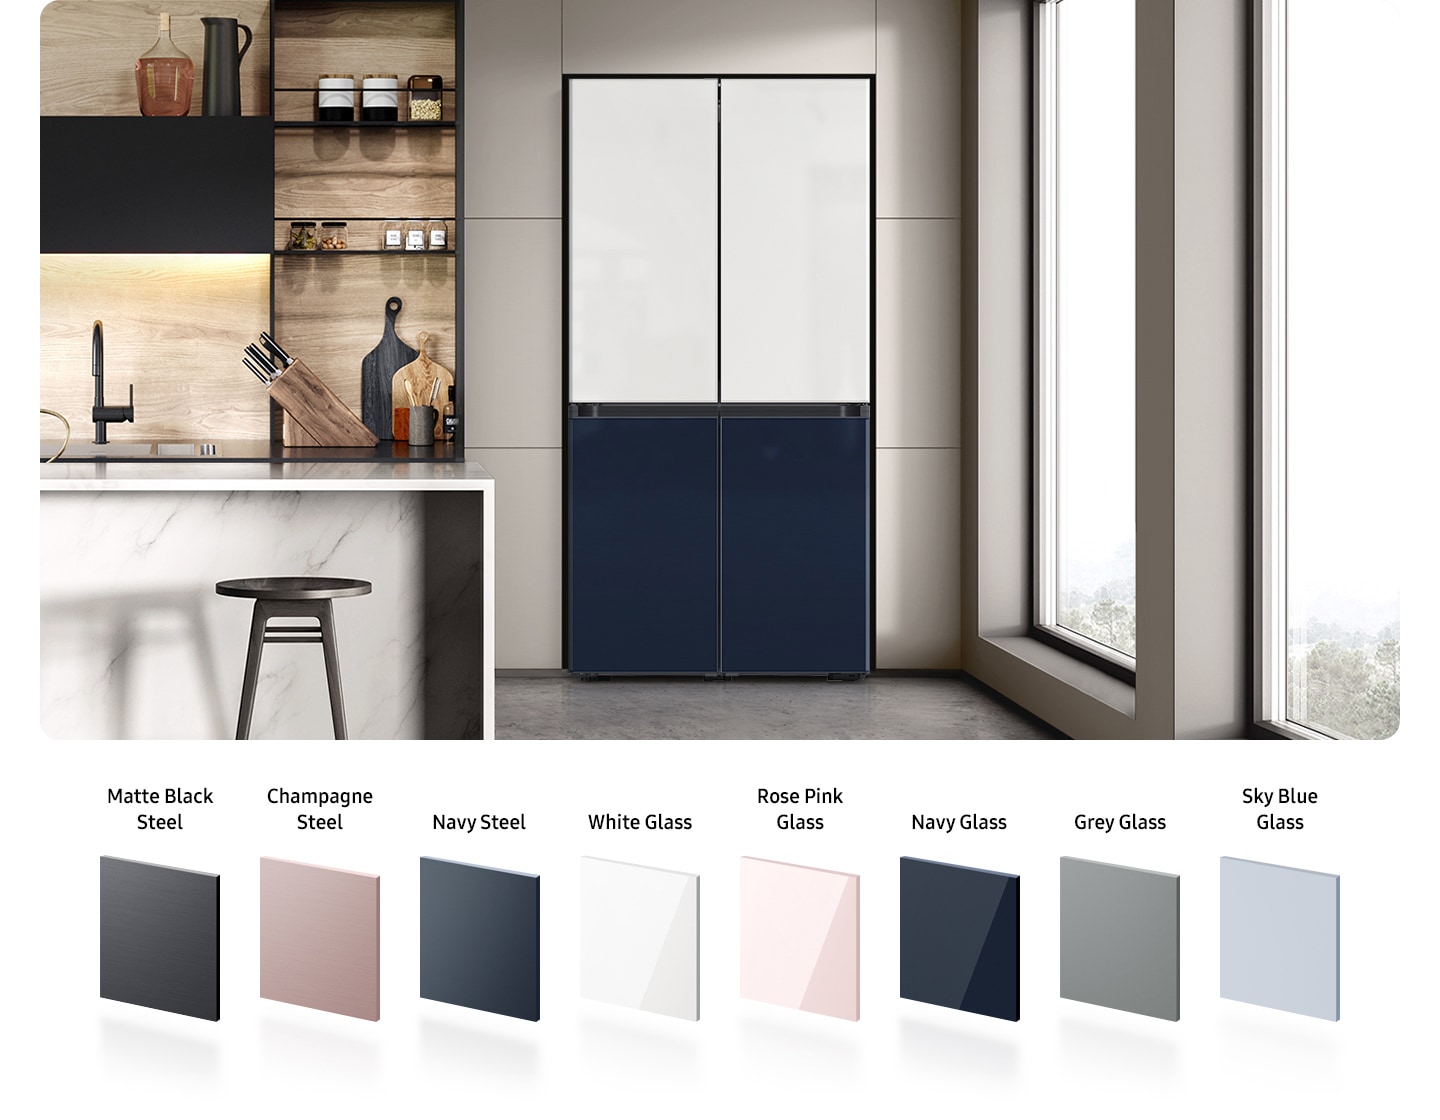 The colors on each of the 4 front panels of the Bespoke refrigerator alternate between the 8 options lined up at the bottom - Matte Black Steel, Champagne Steel, Navy Steel, White Glass, Rose Pink Glass, Navy Glass, Grey Glass, Sky Blue Glass.